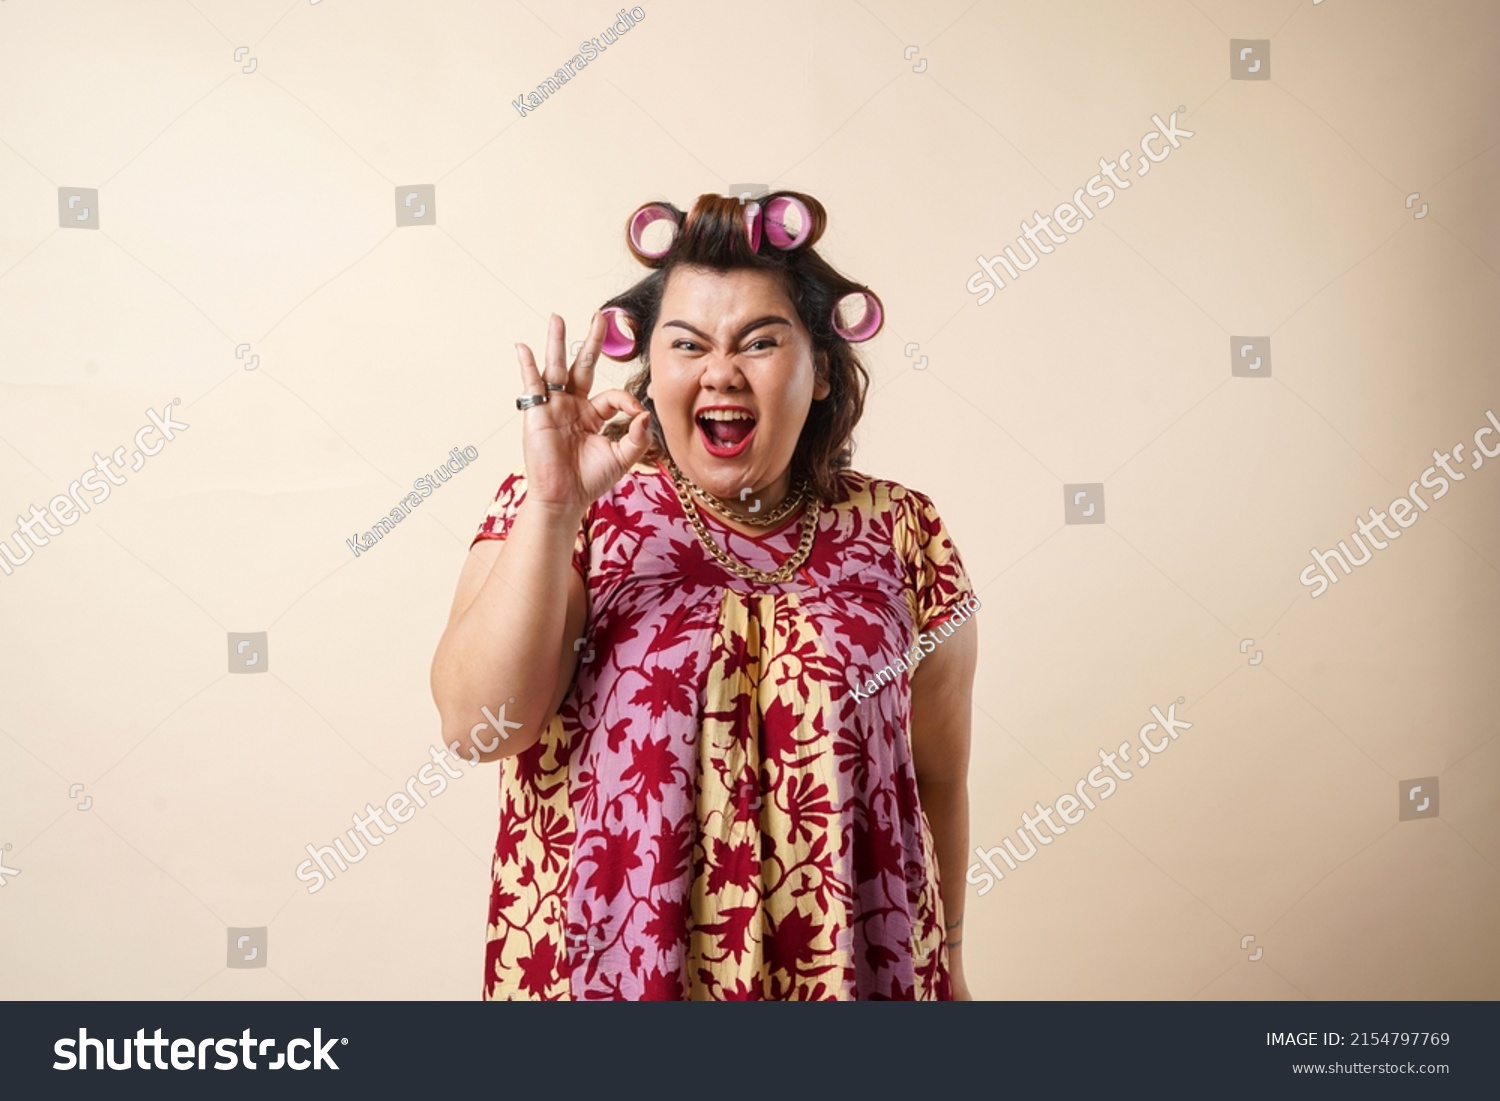 An Asian woman gesturing okay sign using her hand. Isolated on cream background.  #2154797769